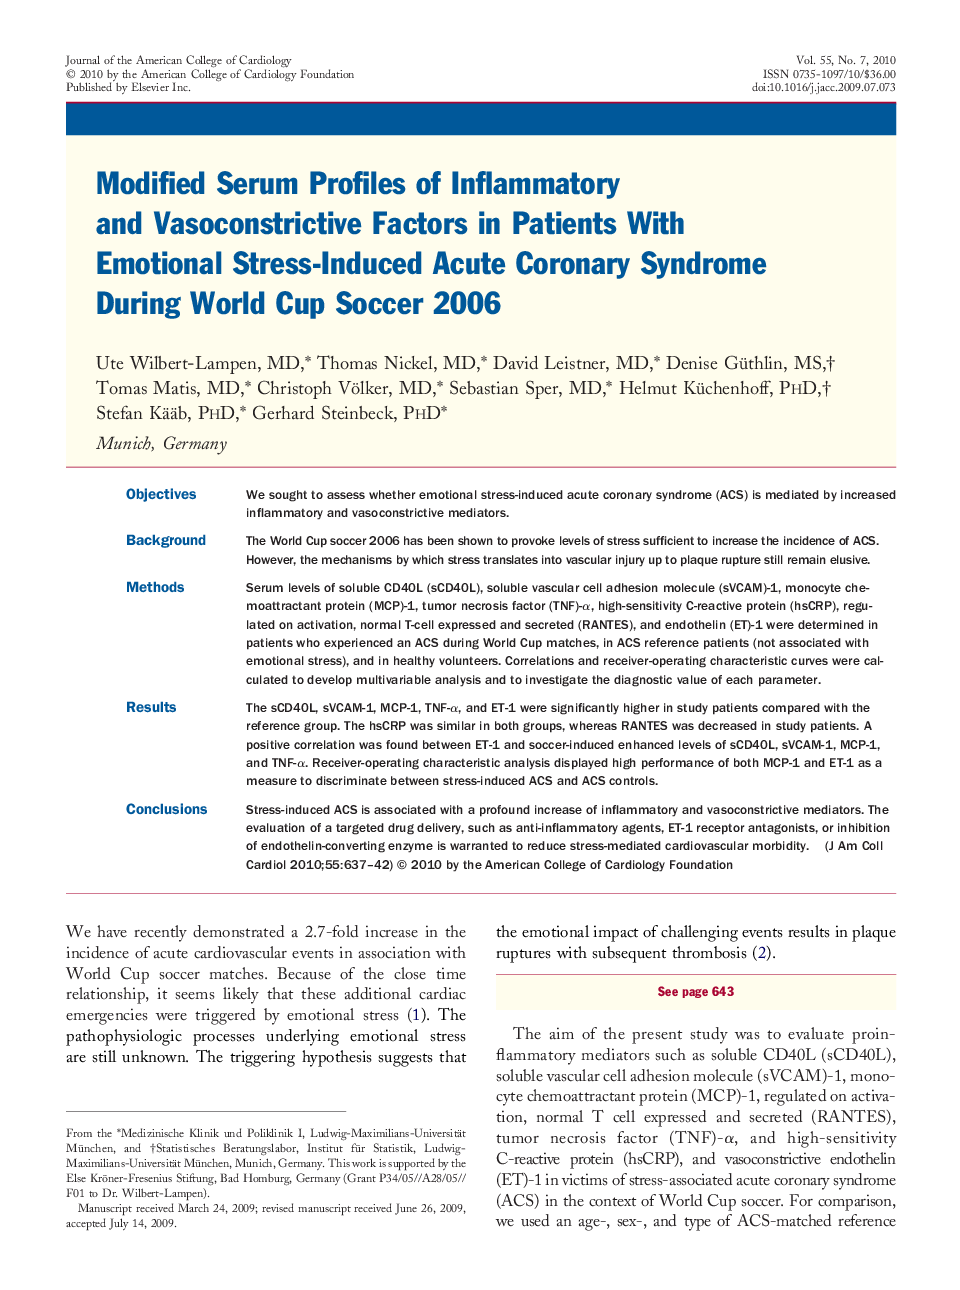 Modified Serum Profiles of Inflammatory and Vasoconstrictive Factors in Patients With Emotional Stress-Induced Acute Coronary Syndrome During World Cup Soccer 2006 